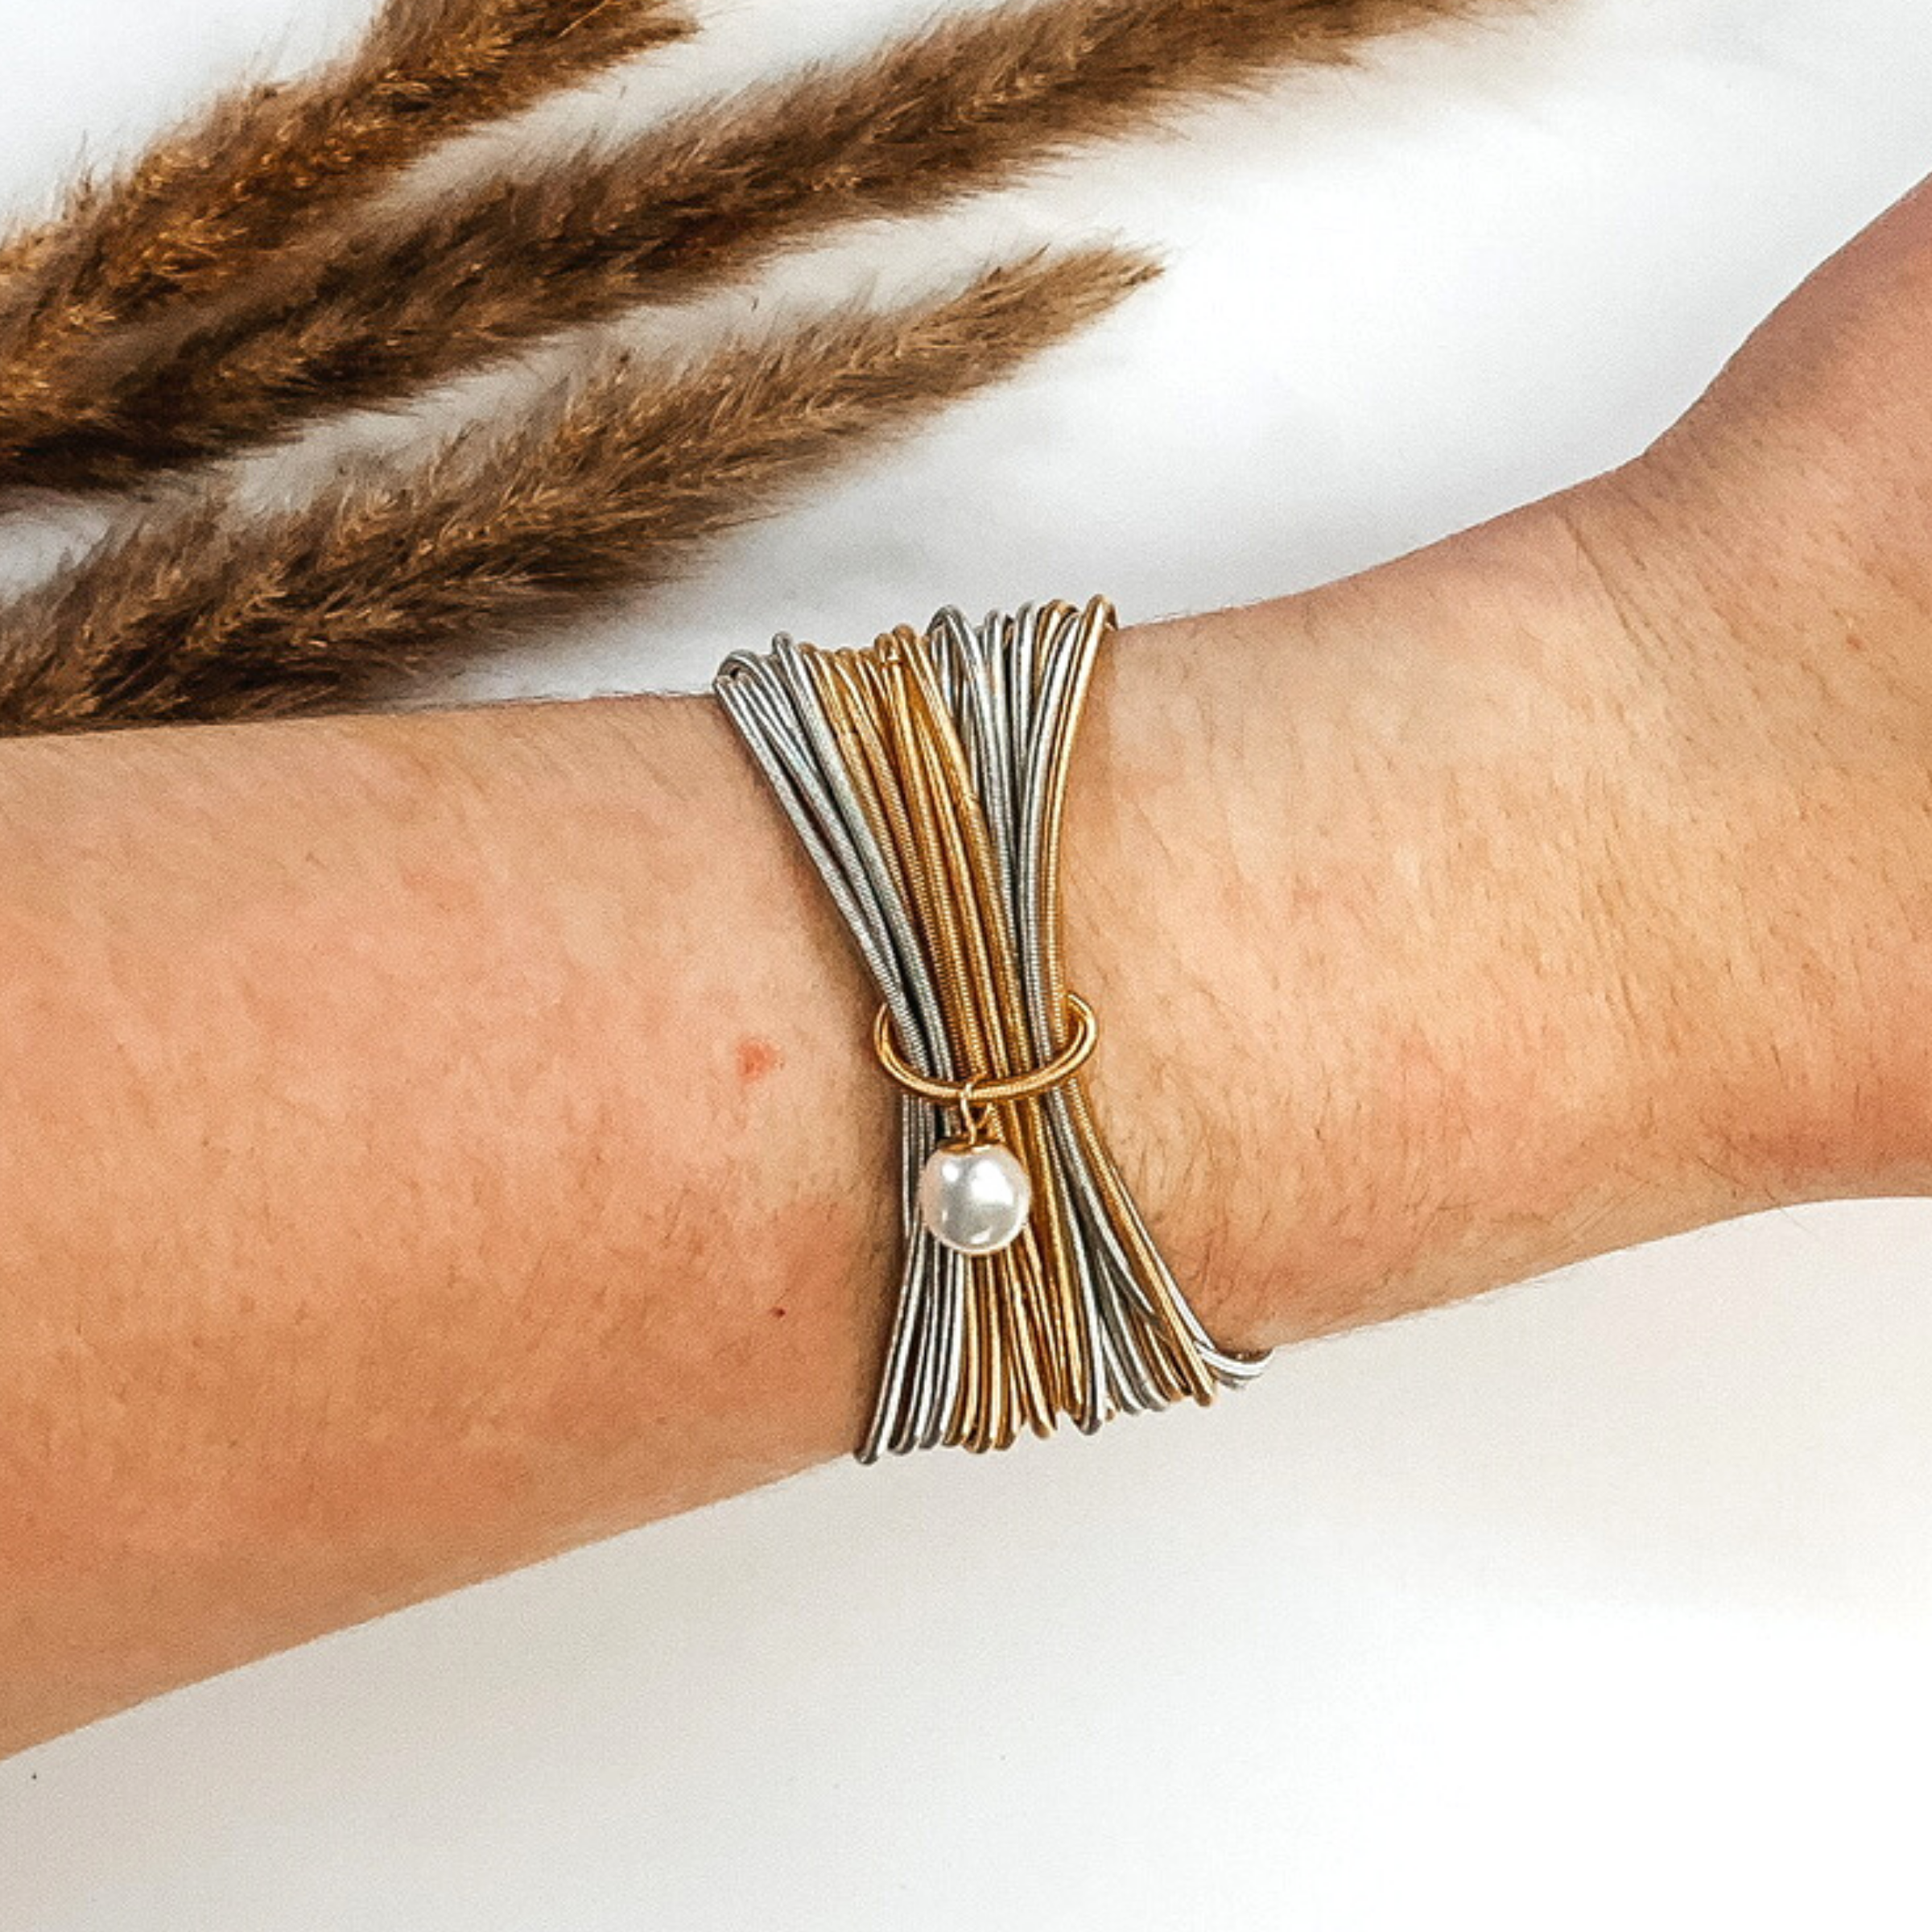 Guitar String Elastic Bracelet Set in Silver/Gold with a Pearl Charm - Giddy Up Glamour Boutique